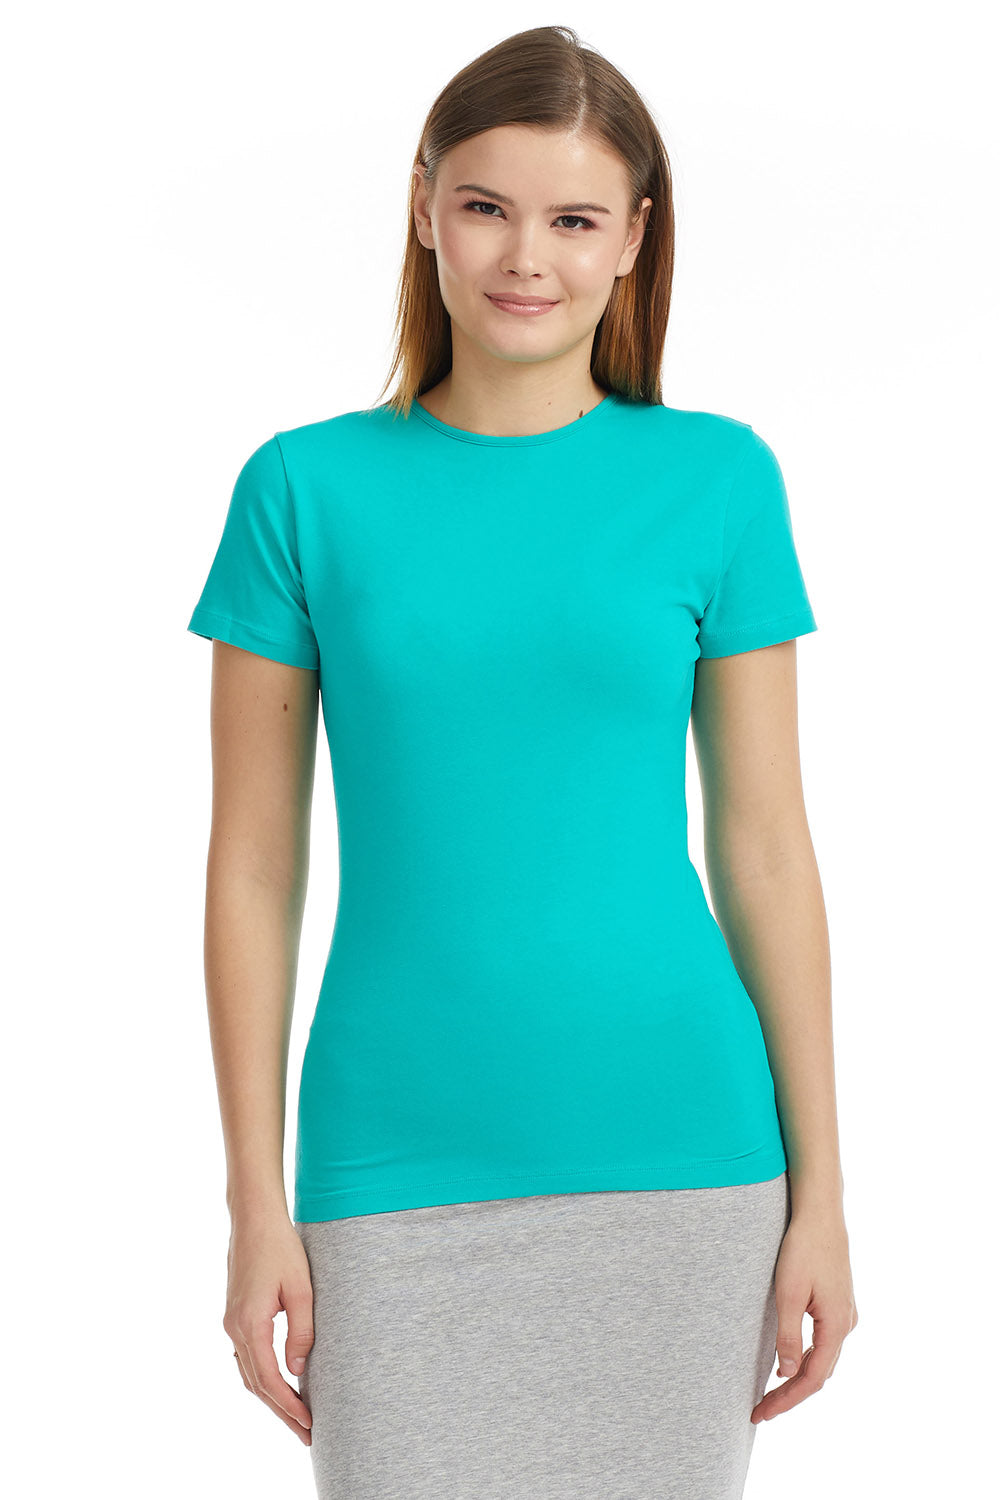 turquoise short sleeve top to wear with jeans